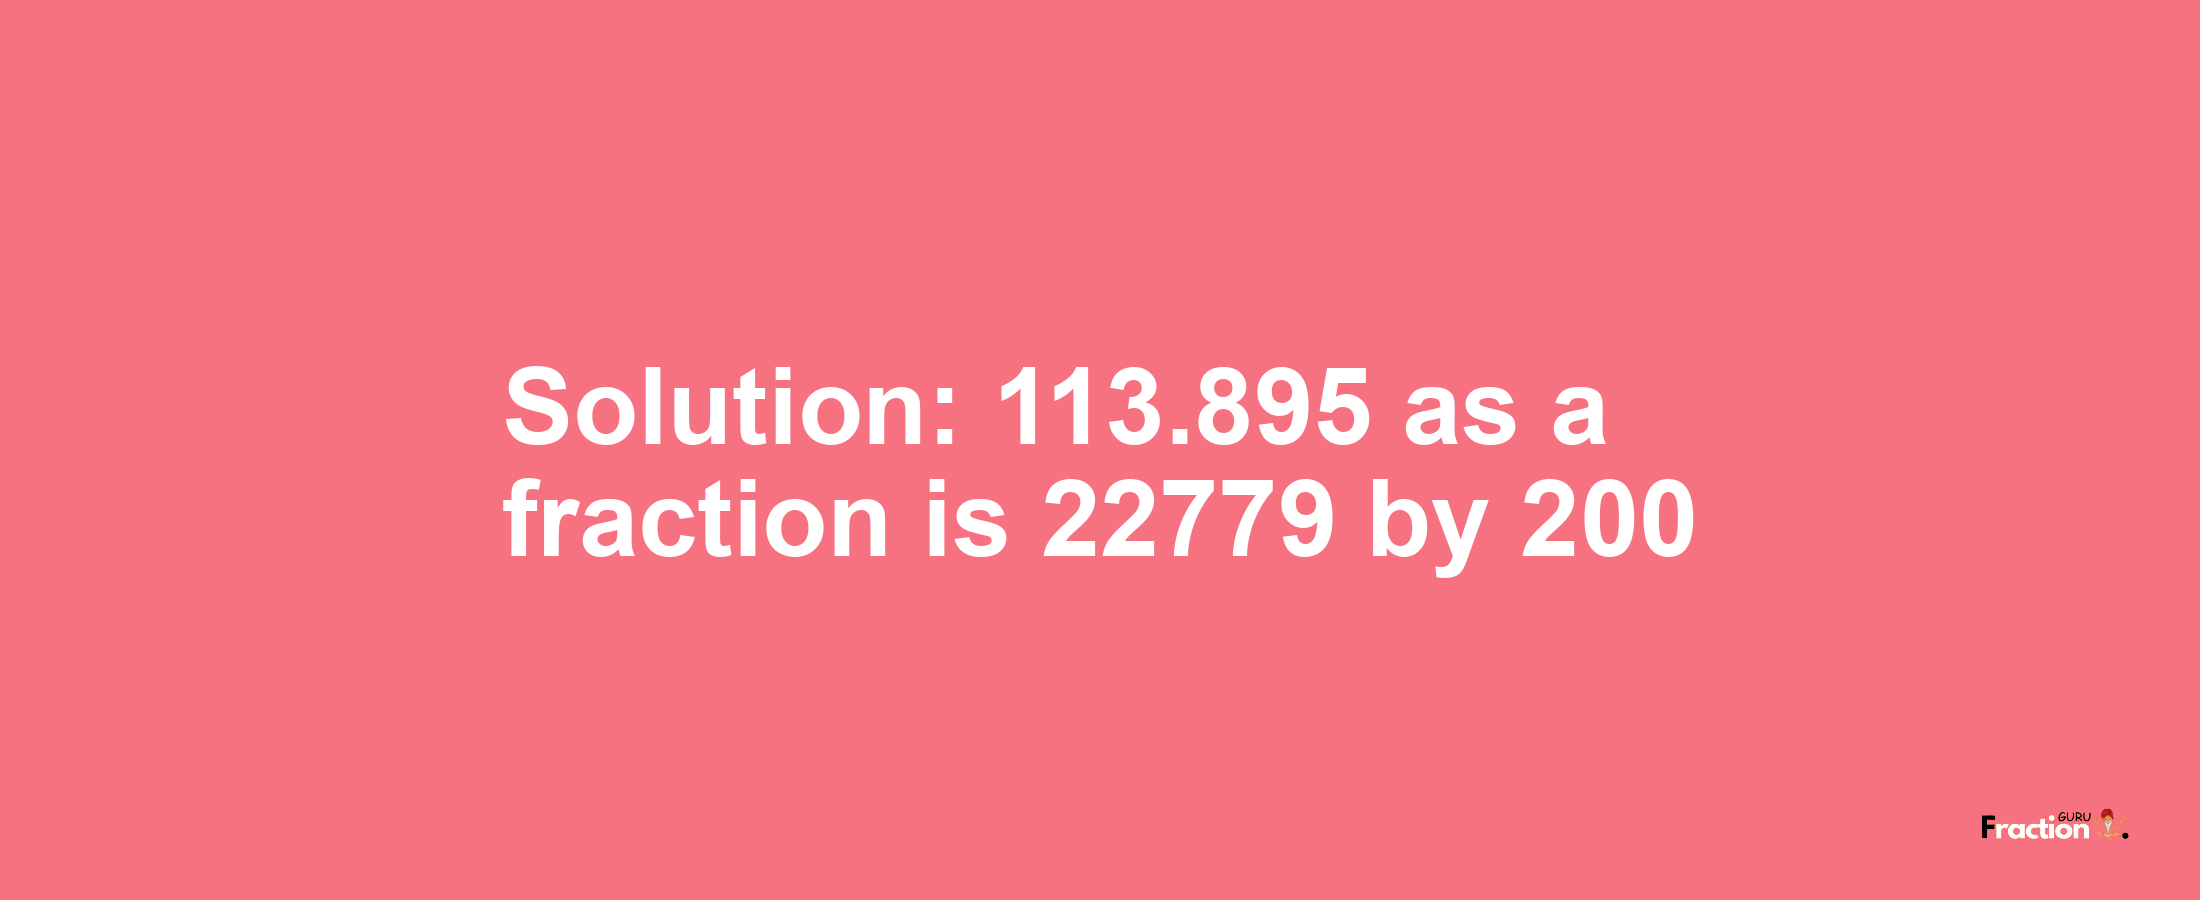 Solution:113.895 as a fraction is 22779/200